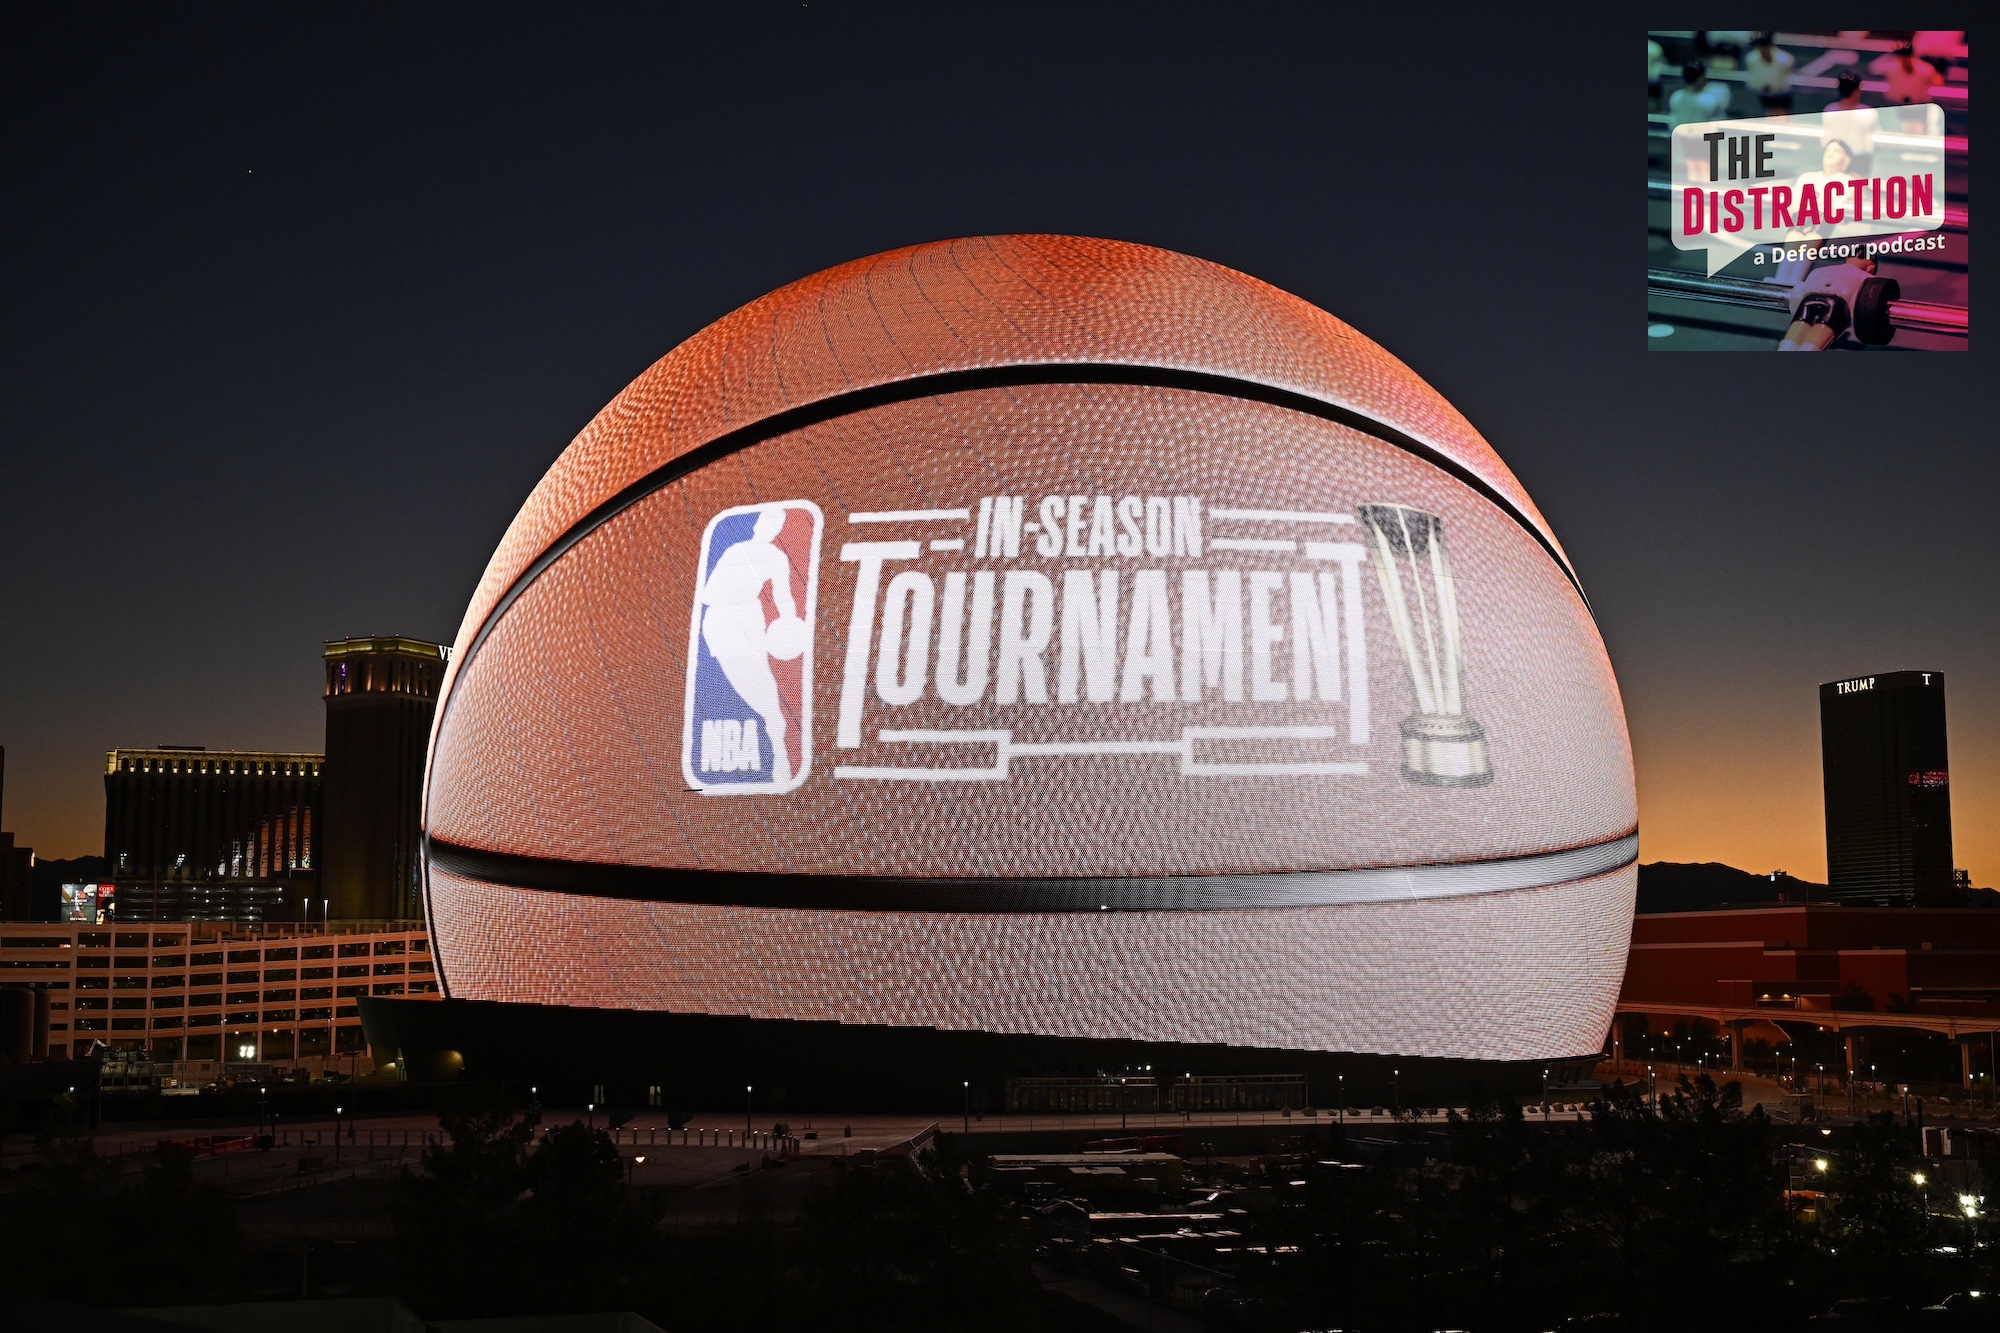 LAS VEGAS, NV - JULY 8: Sphere displays the In Season Tournament visuals on its exterior, the largest LED screen on Earth, during the 2023 Las Vegas Summer League on July 8, 2023 in Las Vegas, Nevada. NOTE TO USER: User expressly acknowledges and agrees that, by downloading and/or using this Photograph, user is consenting to the terms and conditions of the Getty Images License Agreement. Mandatory Copyright Notice: Copyright 2023 NBAE (Photo by David Dow/NBAE via Getty Images)